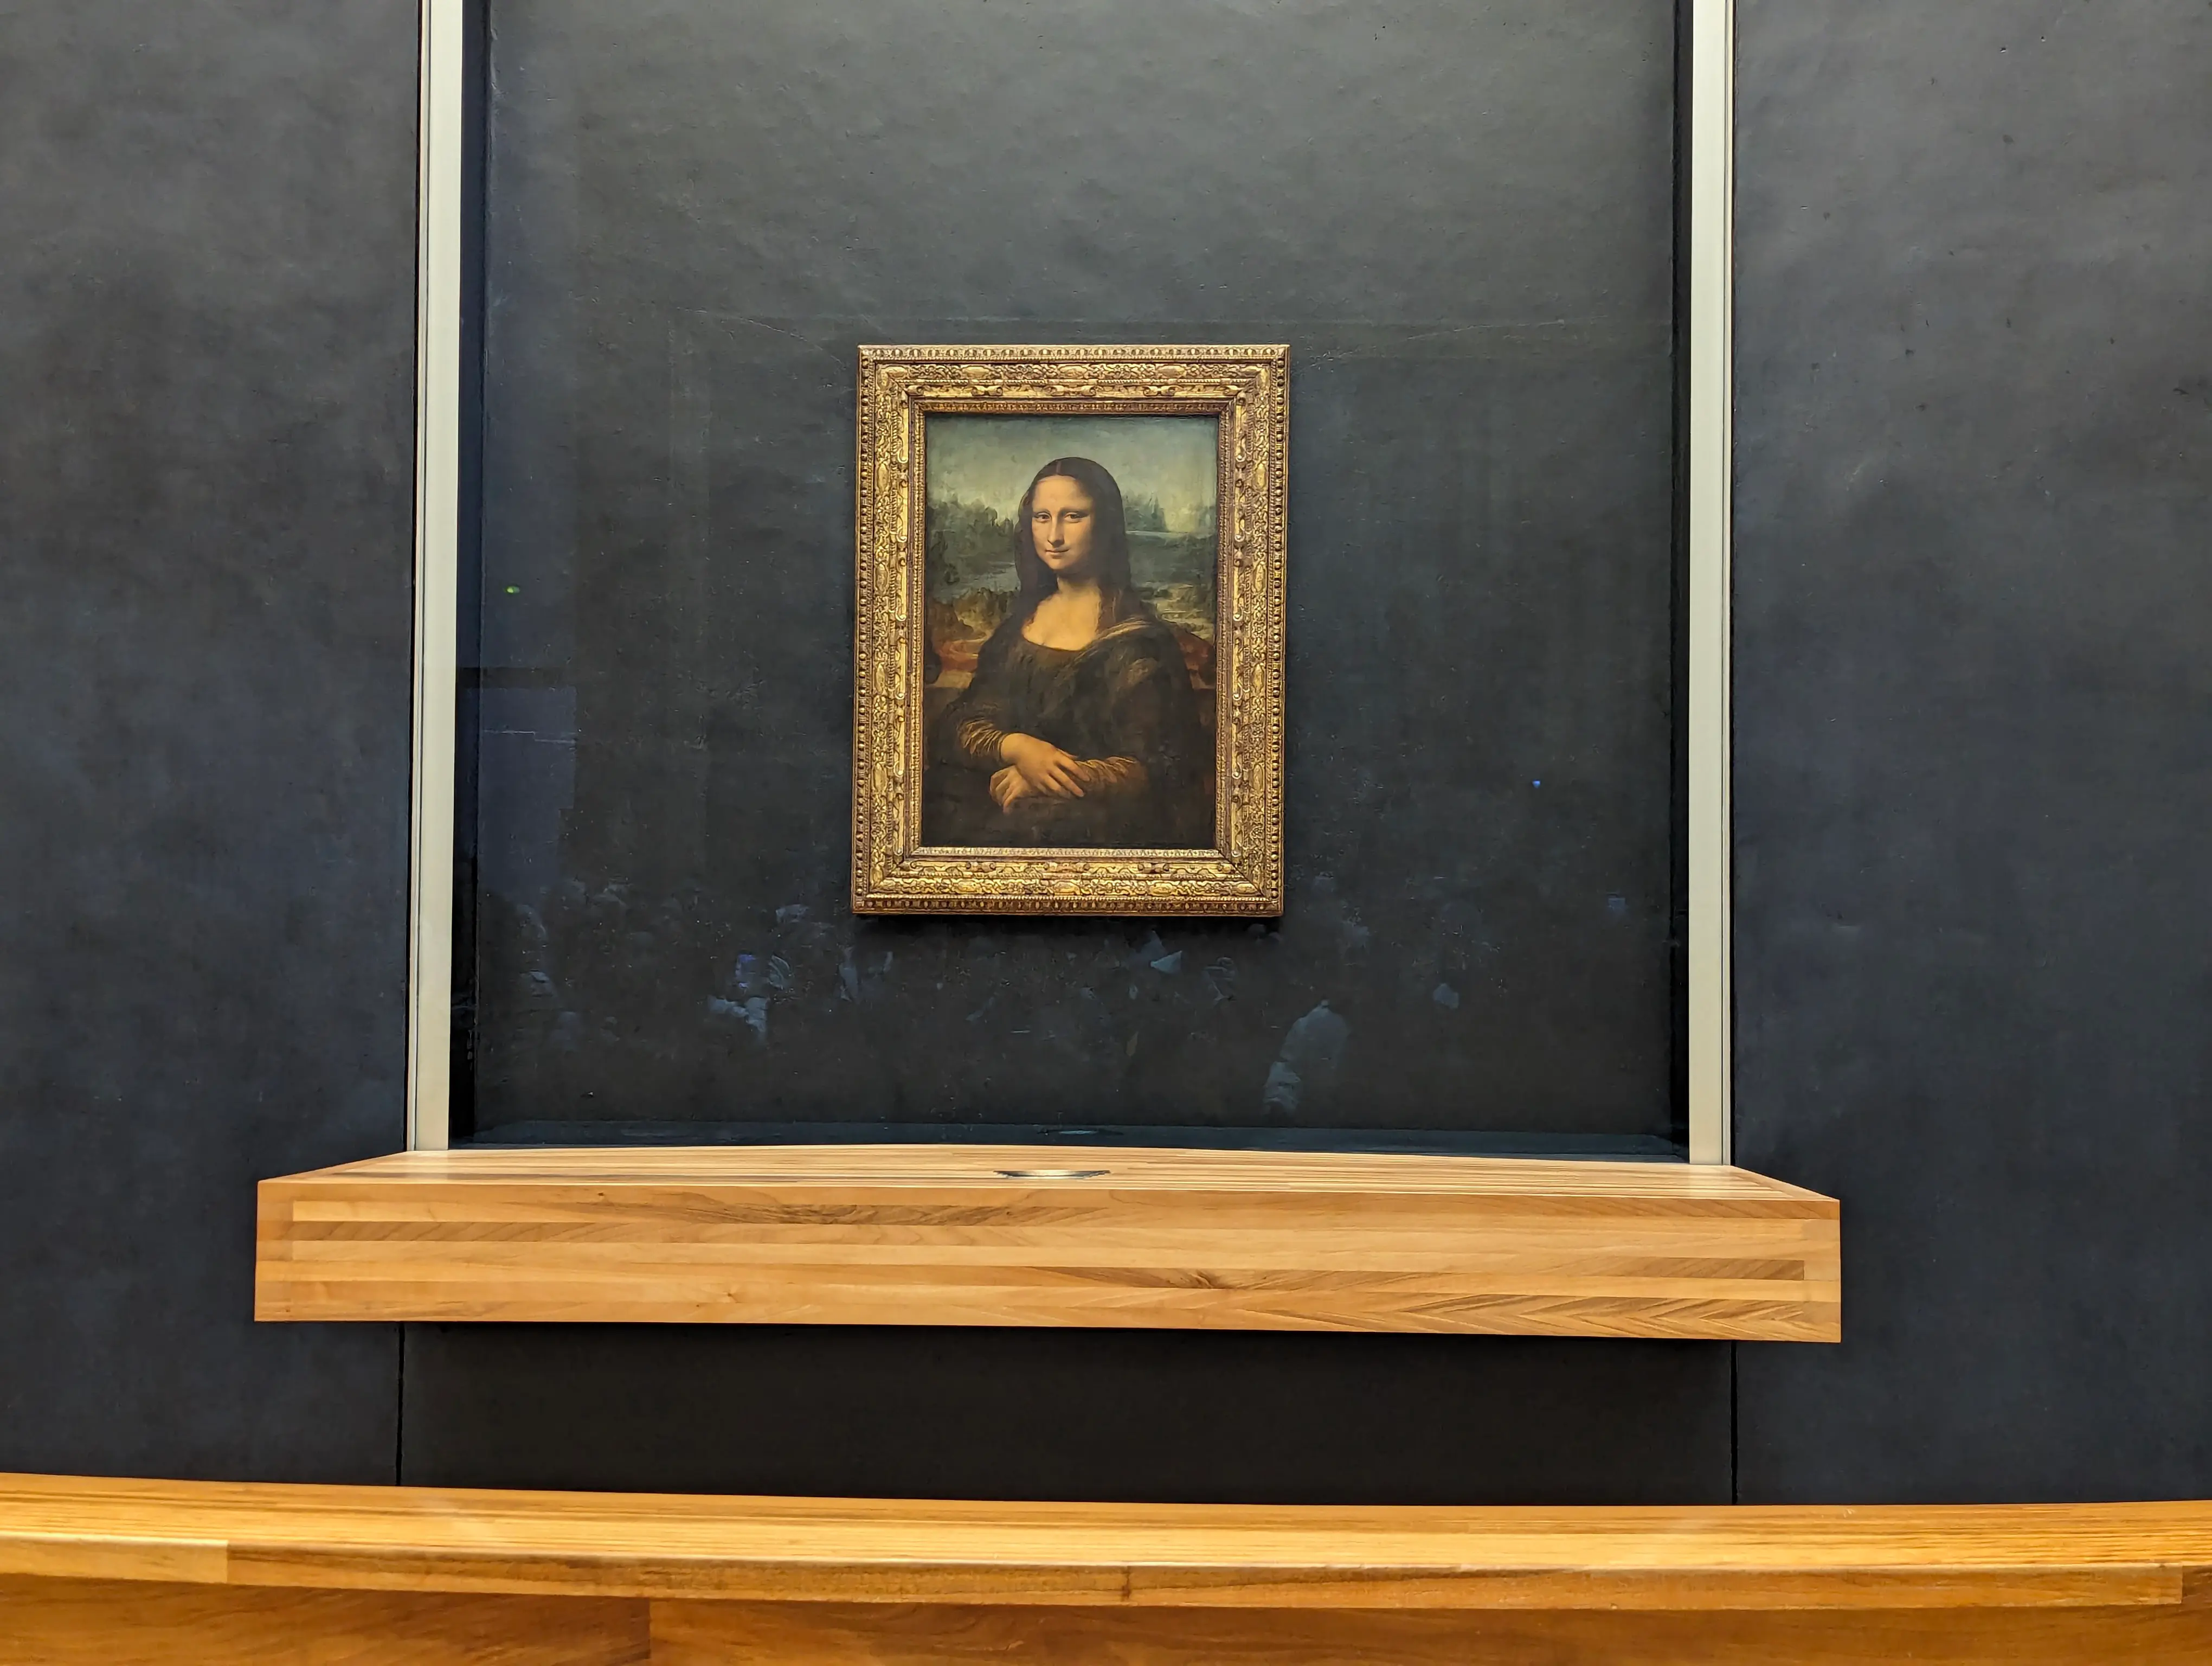 The Mona Lisa, front and center at the Louvre